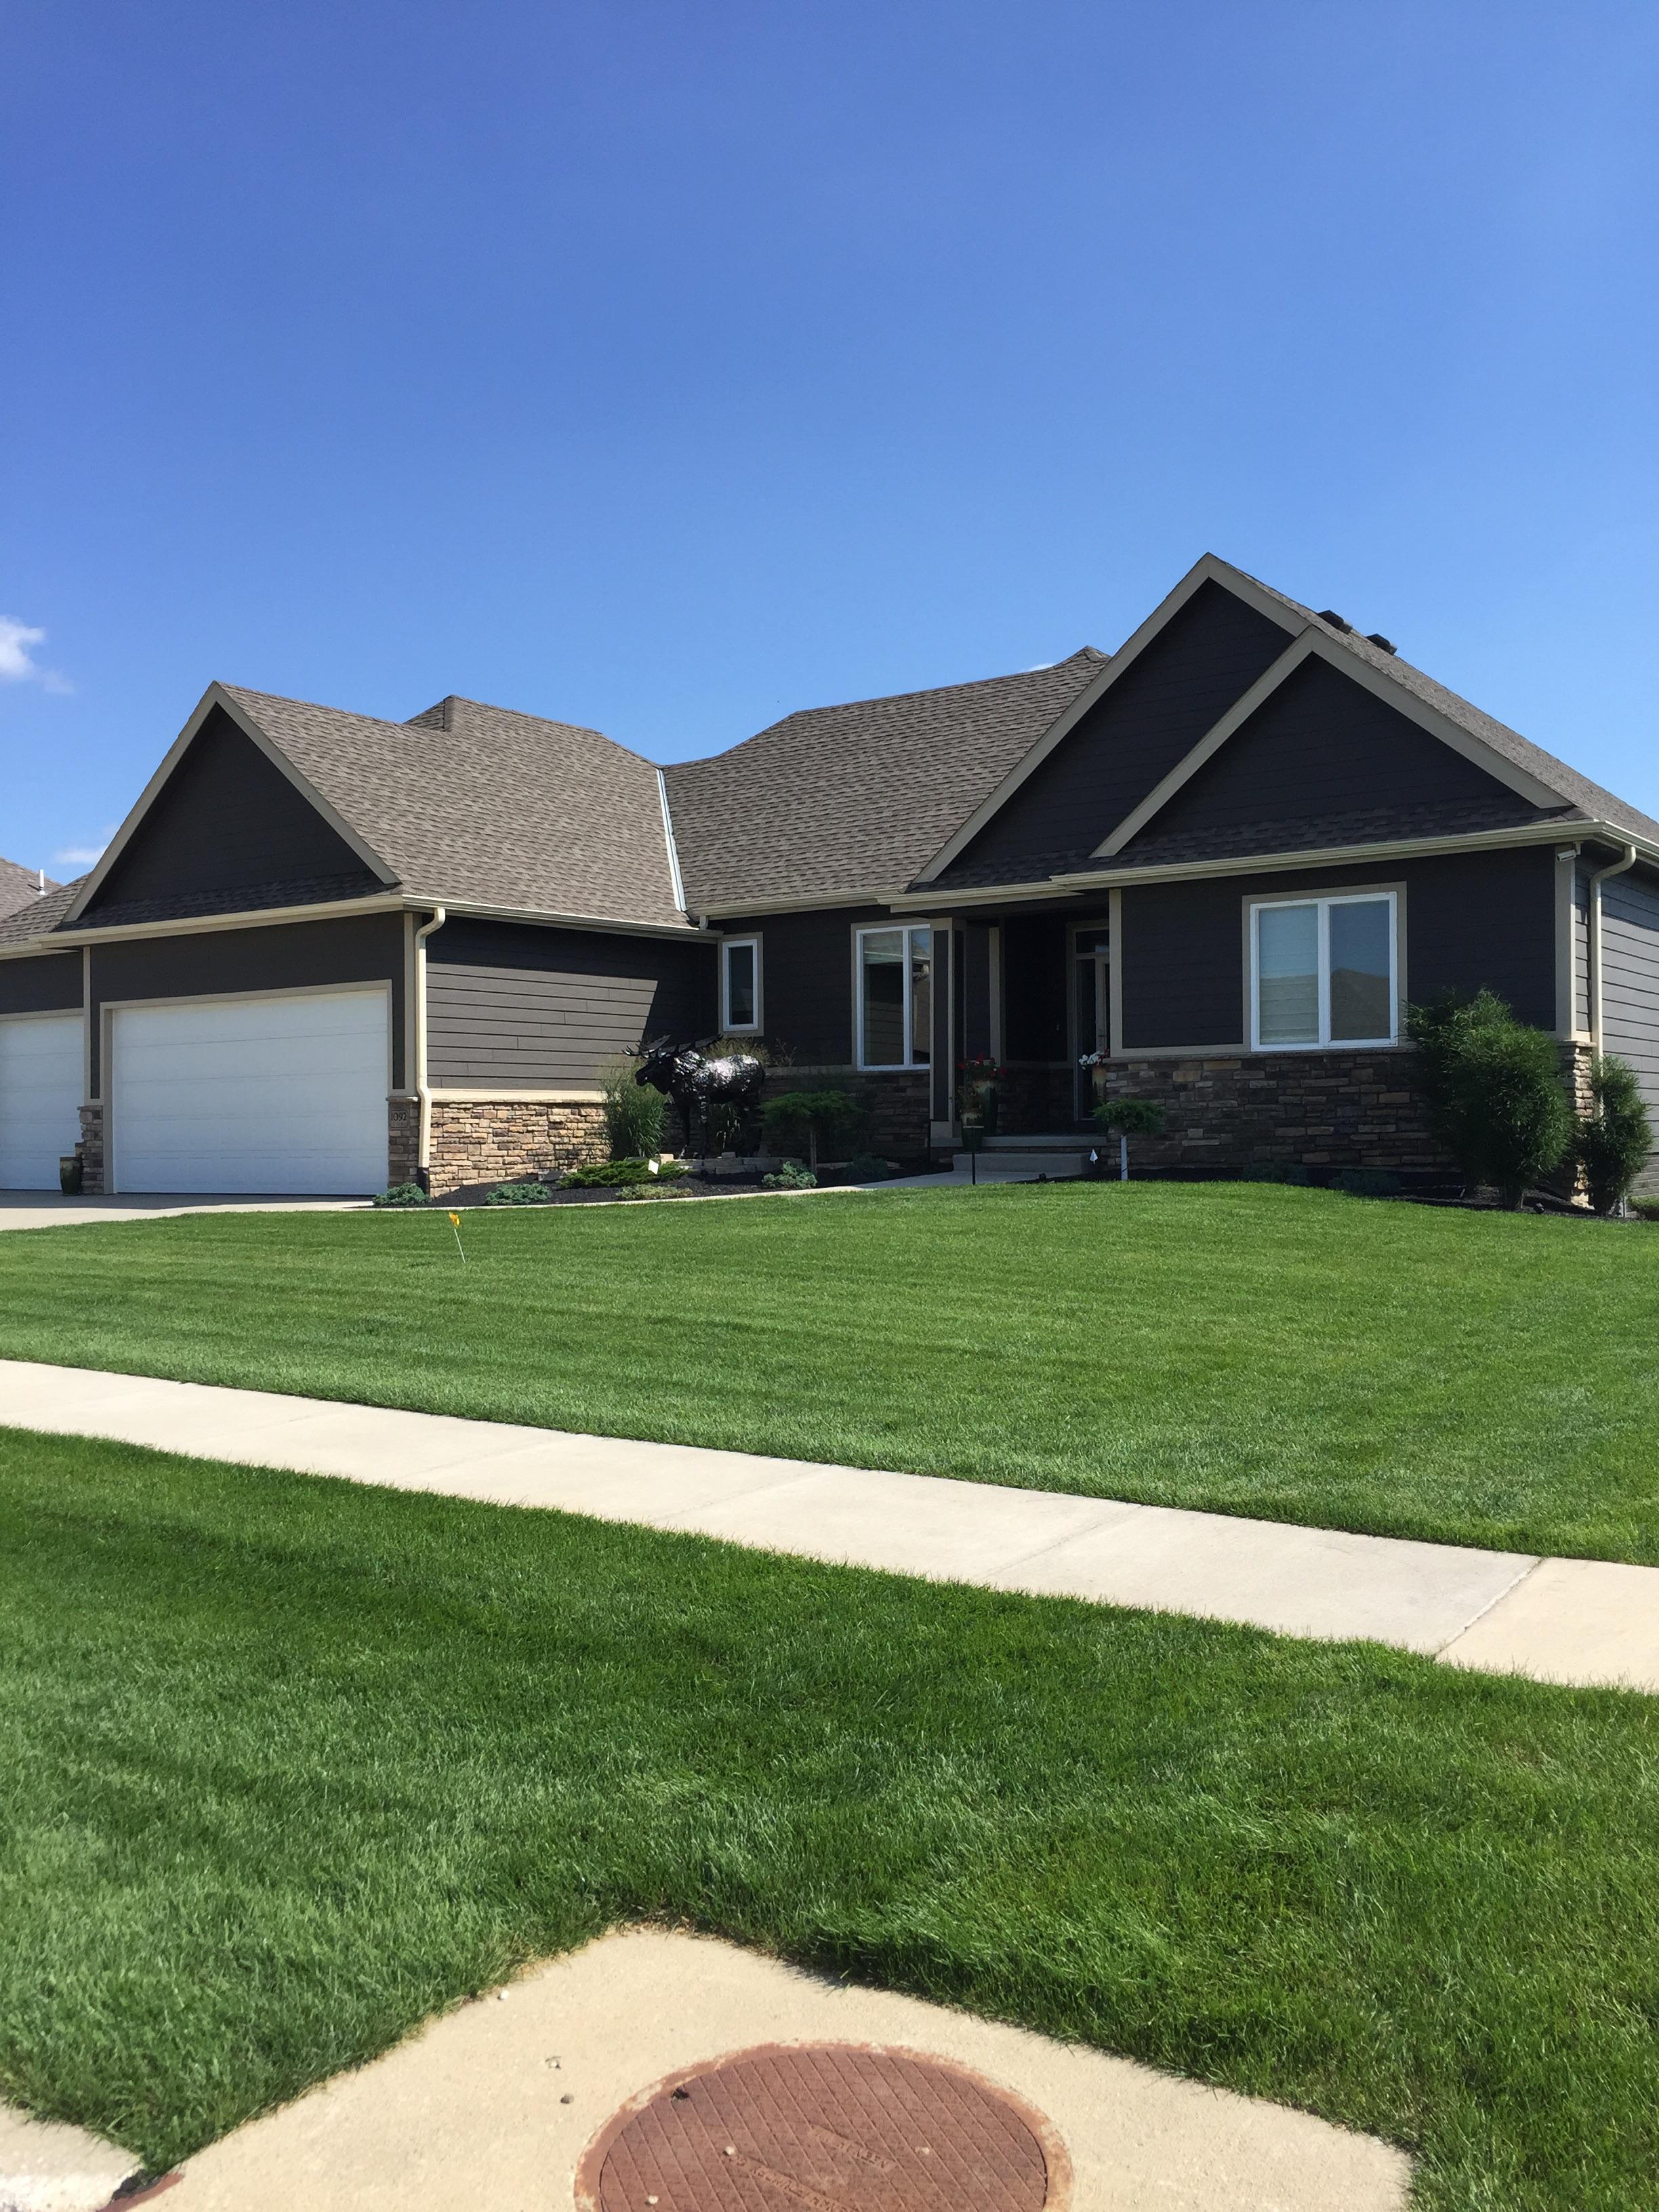 1092 PGA Drive, Le Mars IA. Hosted by Austin Sitzmann. Smart home, on the golf course, loaded w/ amenities. Please come take a look!